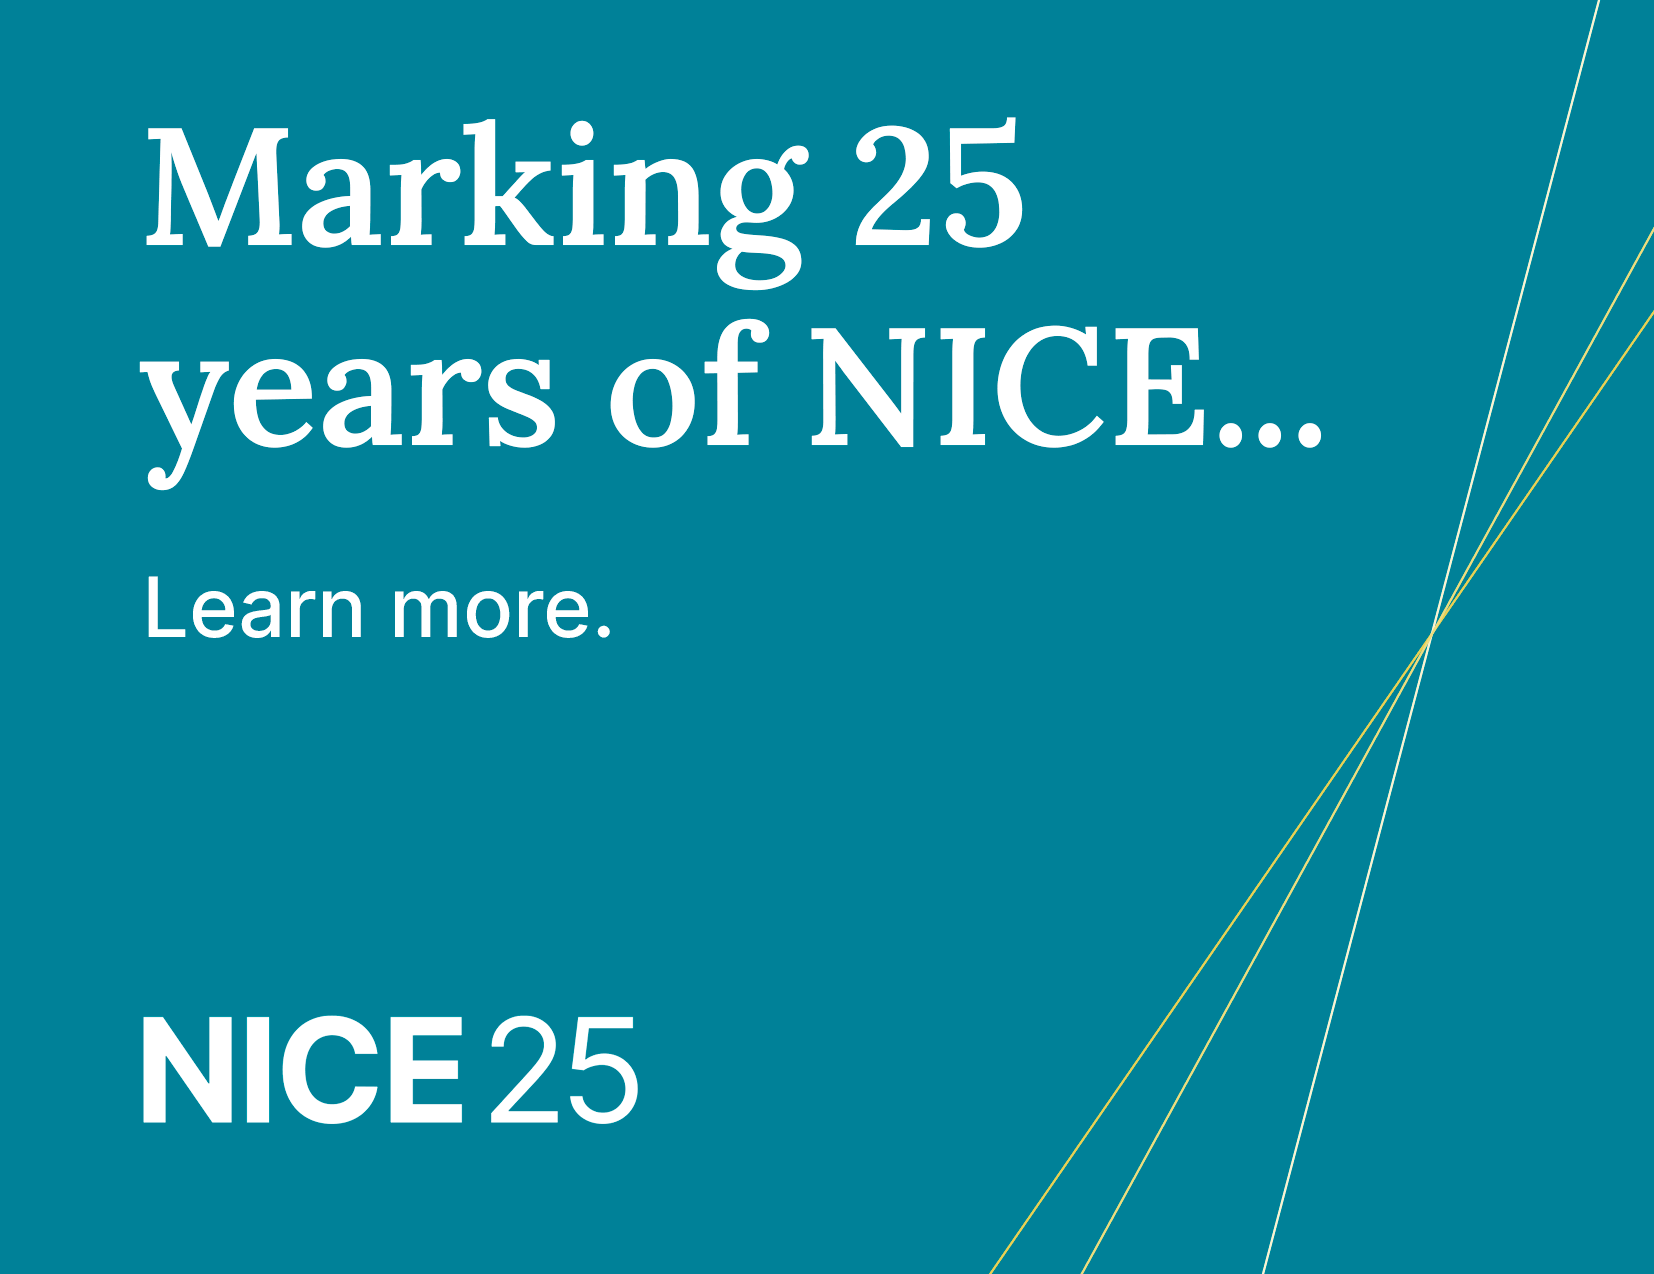 Learn more about how we're marking 25 years of NICE